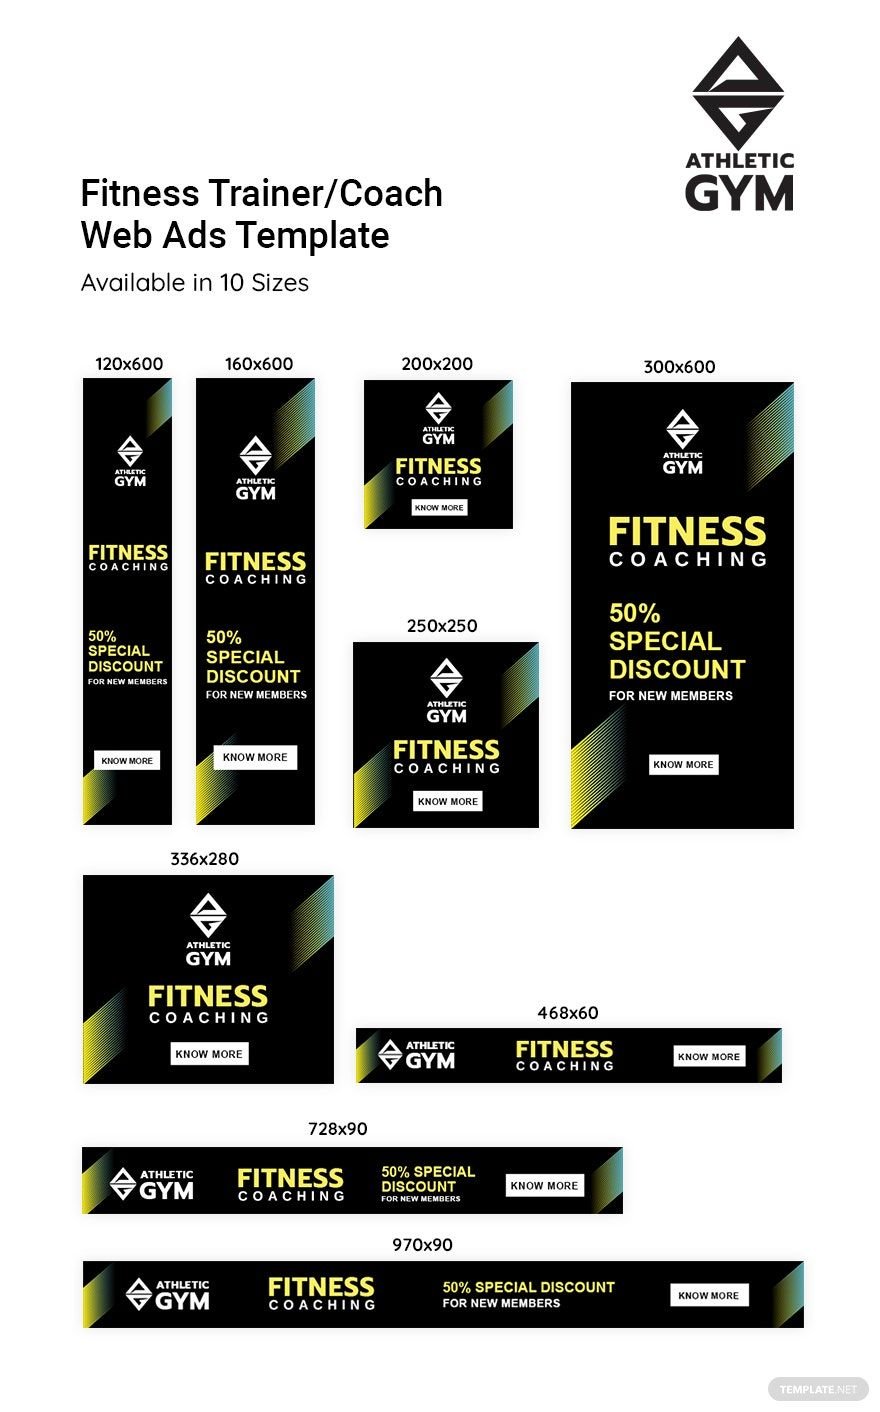 Fitness Trainer/Coach Web Ads Template